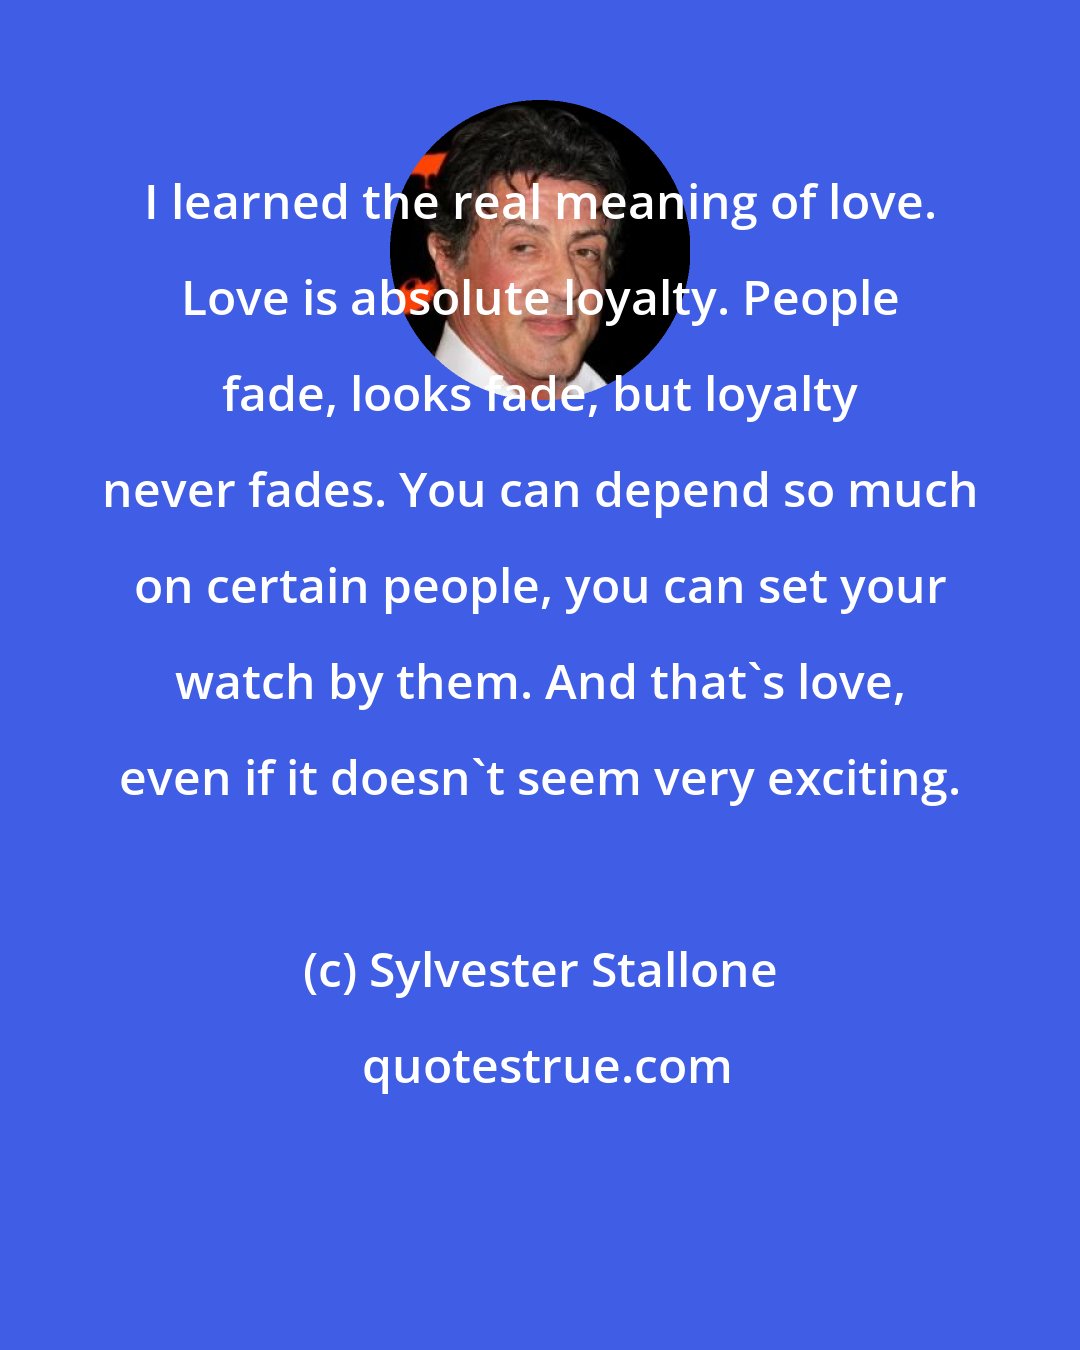 Sylvester Stallone: I learned the real meaning of love. Love is absolute loyalty. People fade, looks fade, but loyalty never fades. You can depend so much on certain people, you can set your watch by them. And that's love, even if it doesn't seem very exciting.